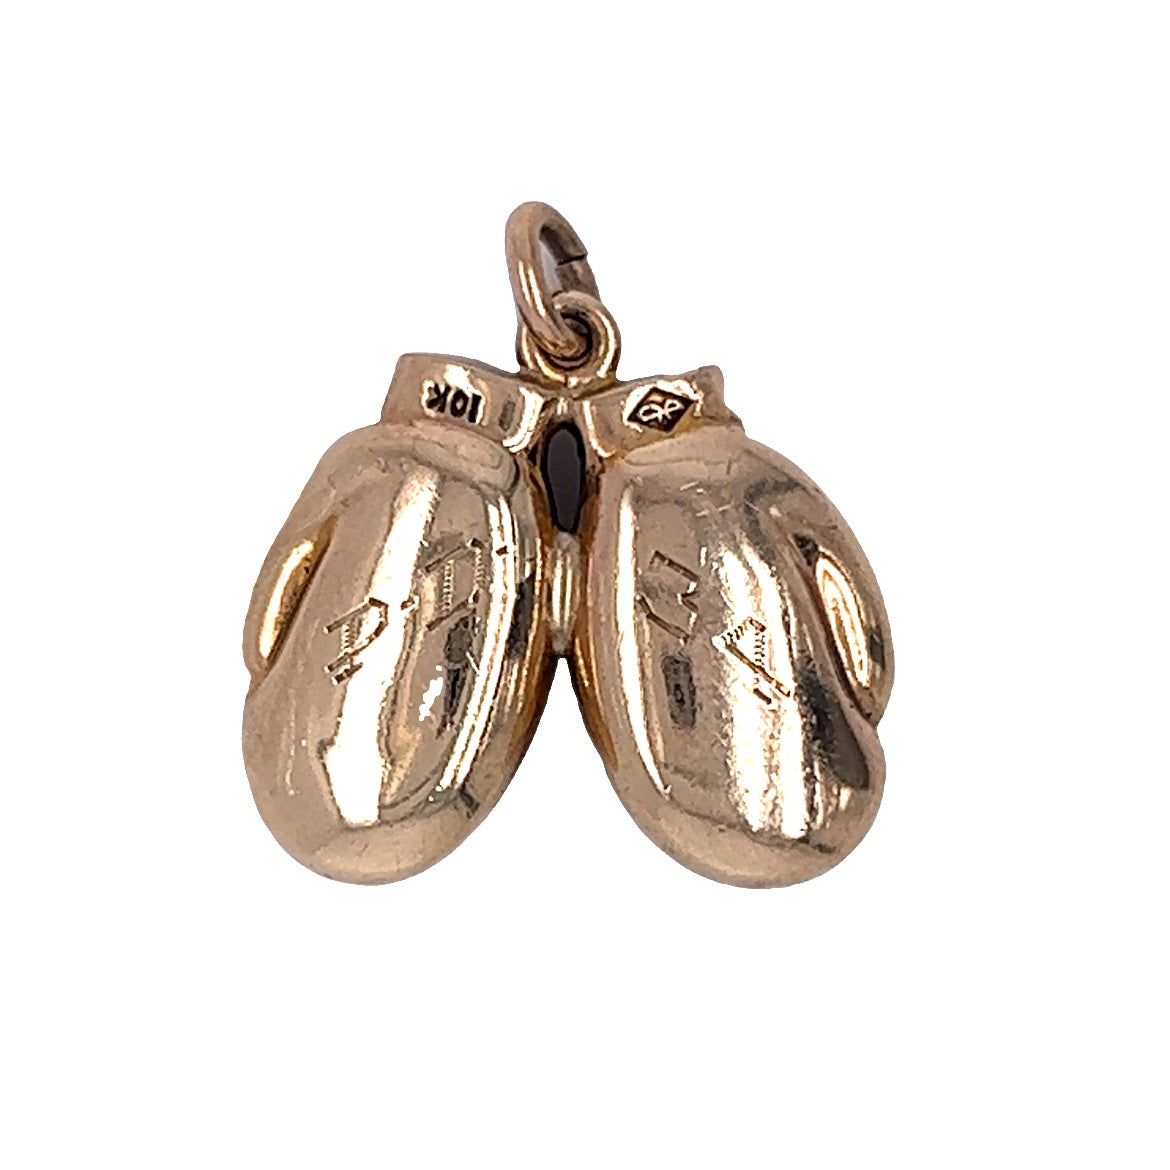 Vintage Boxing Glove Charm in 10k Yellow Gold